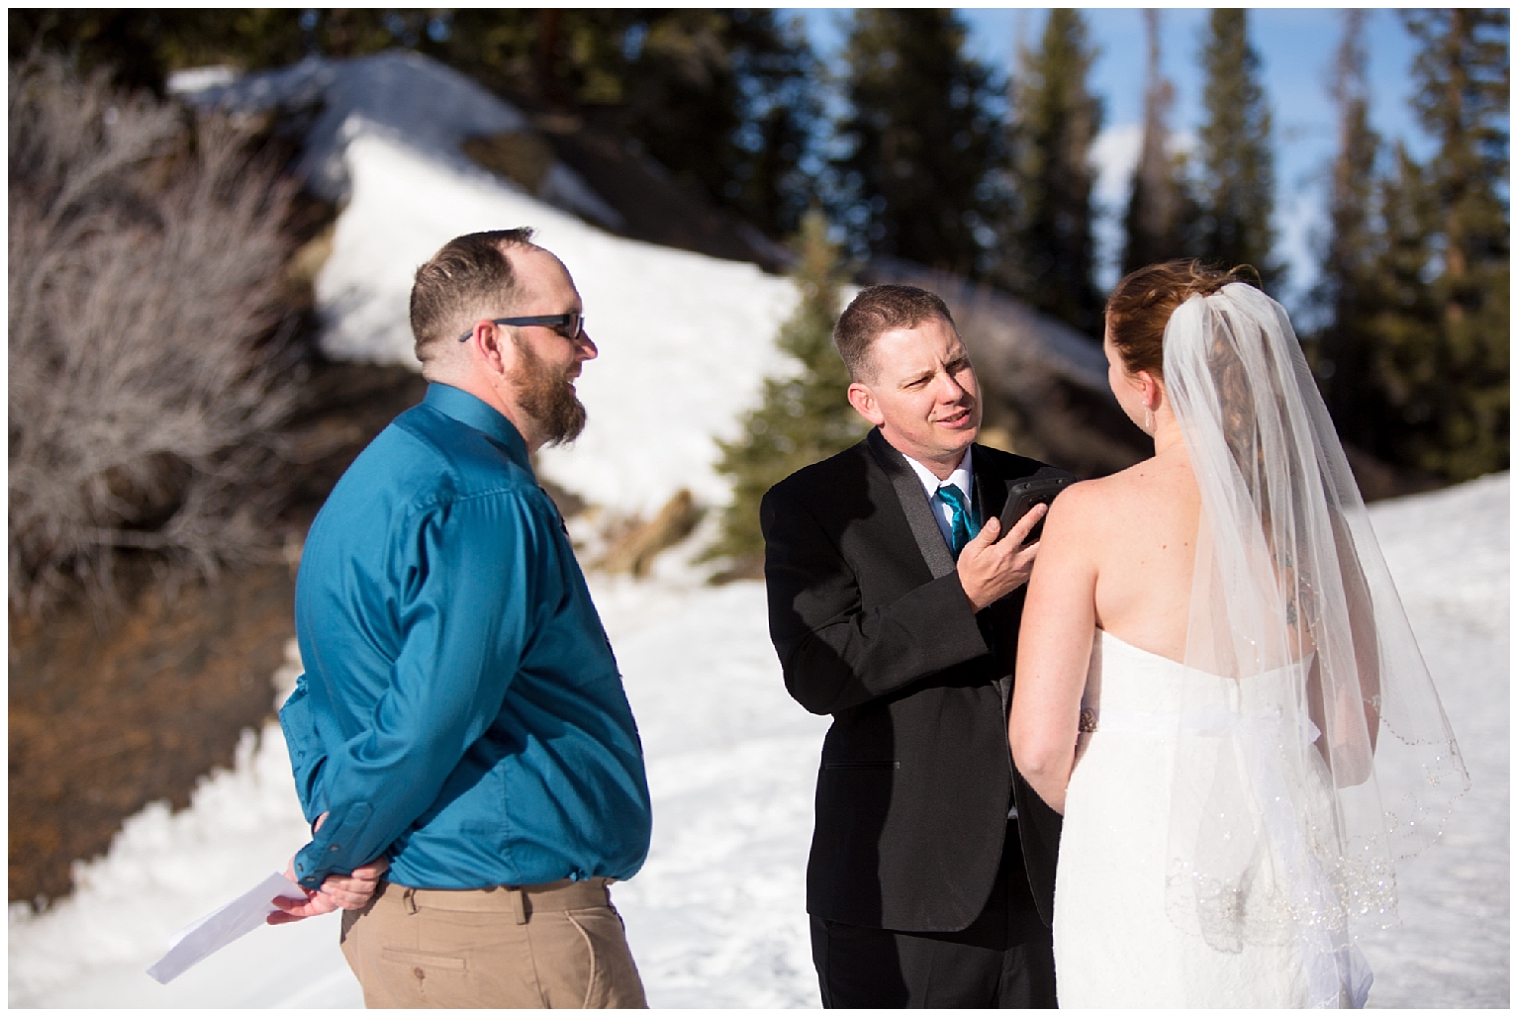 Groom reads his vows off of his phone at his Breckenridge Colorado elopement.